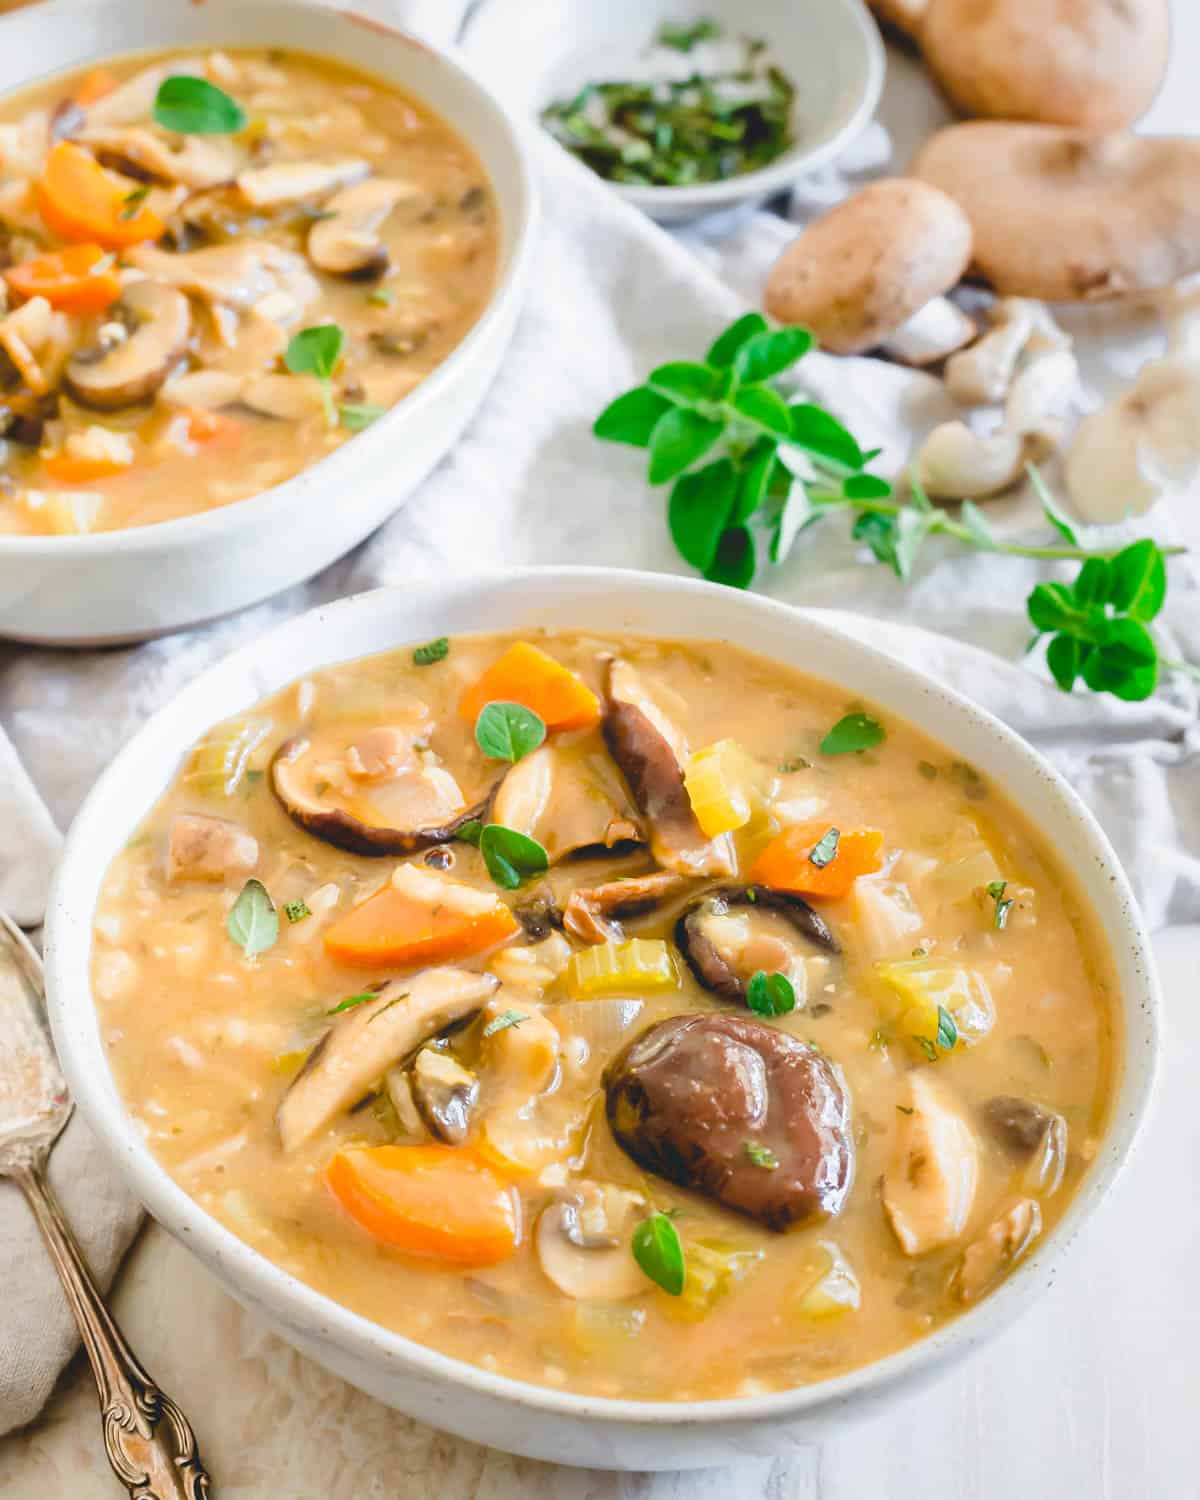 Gluten-free and vegan mushroom soup with rice in a serving bowl.